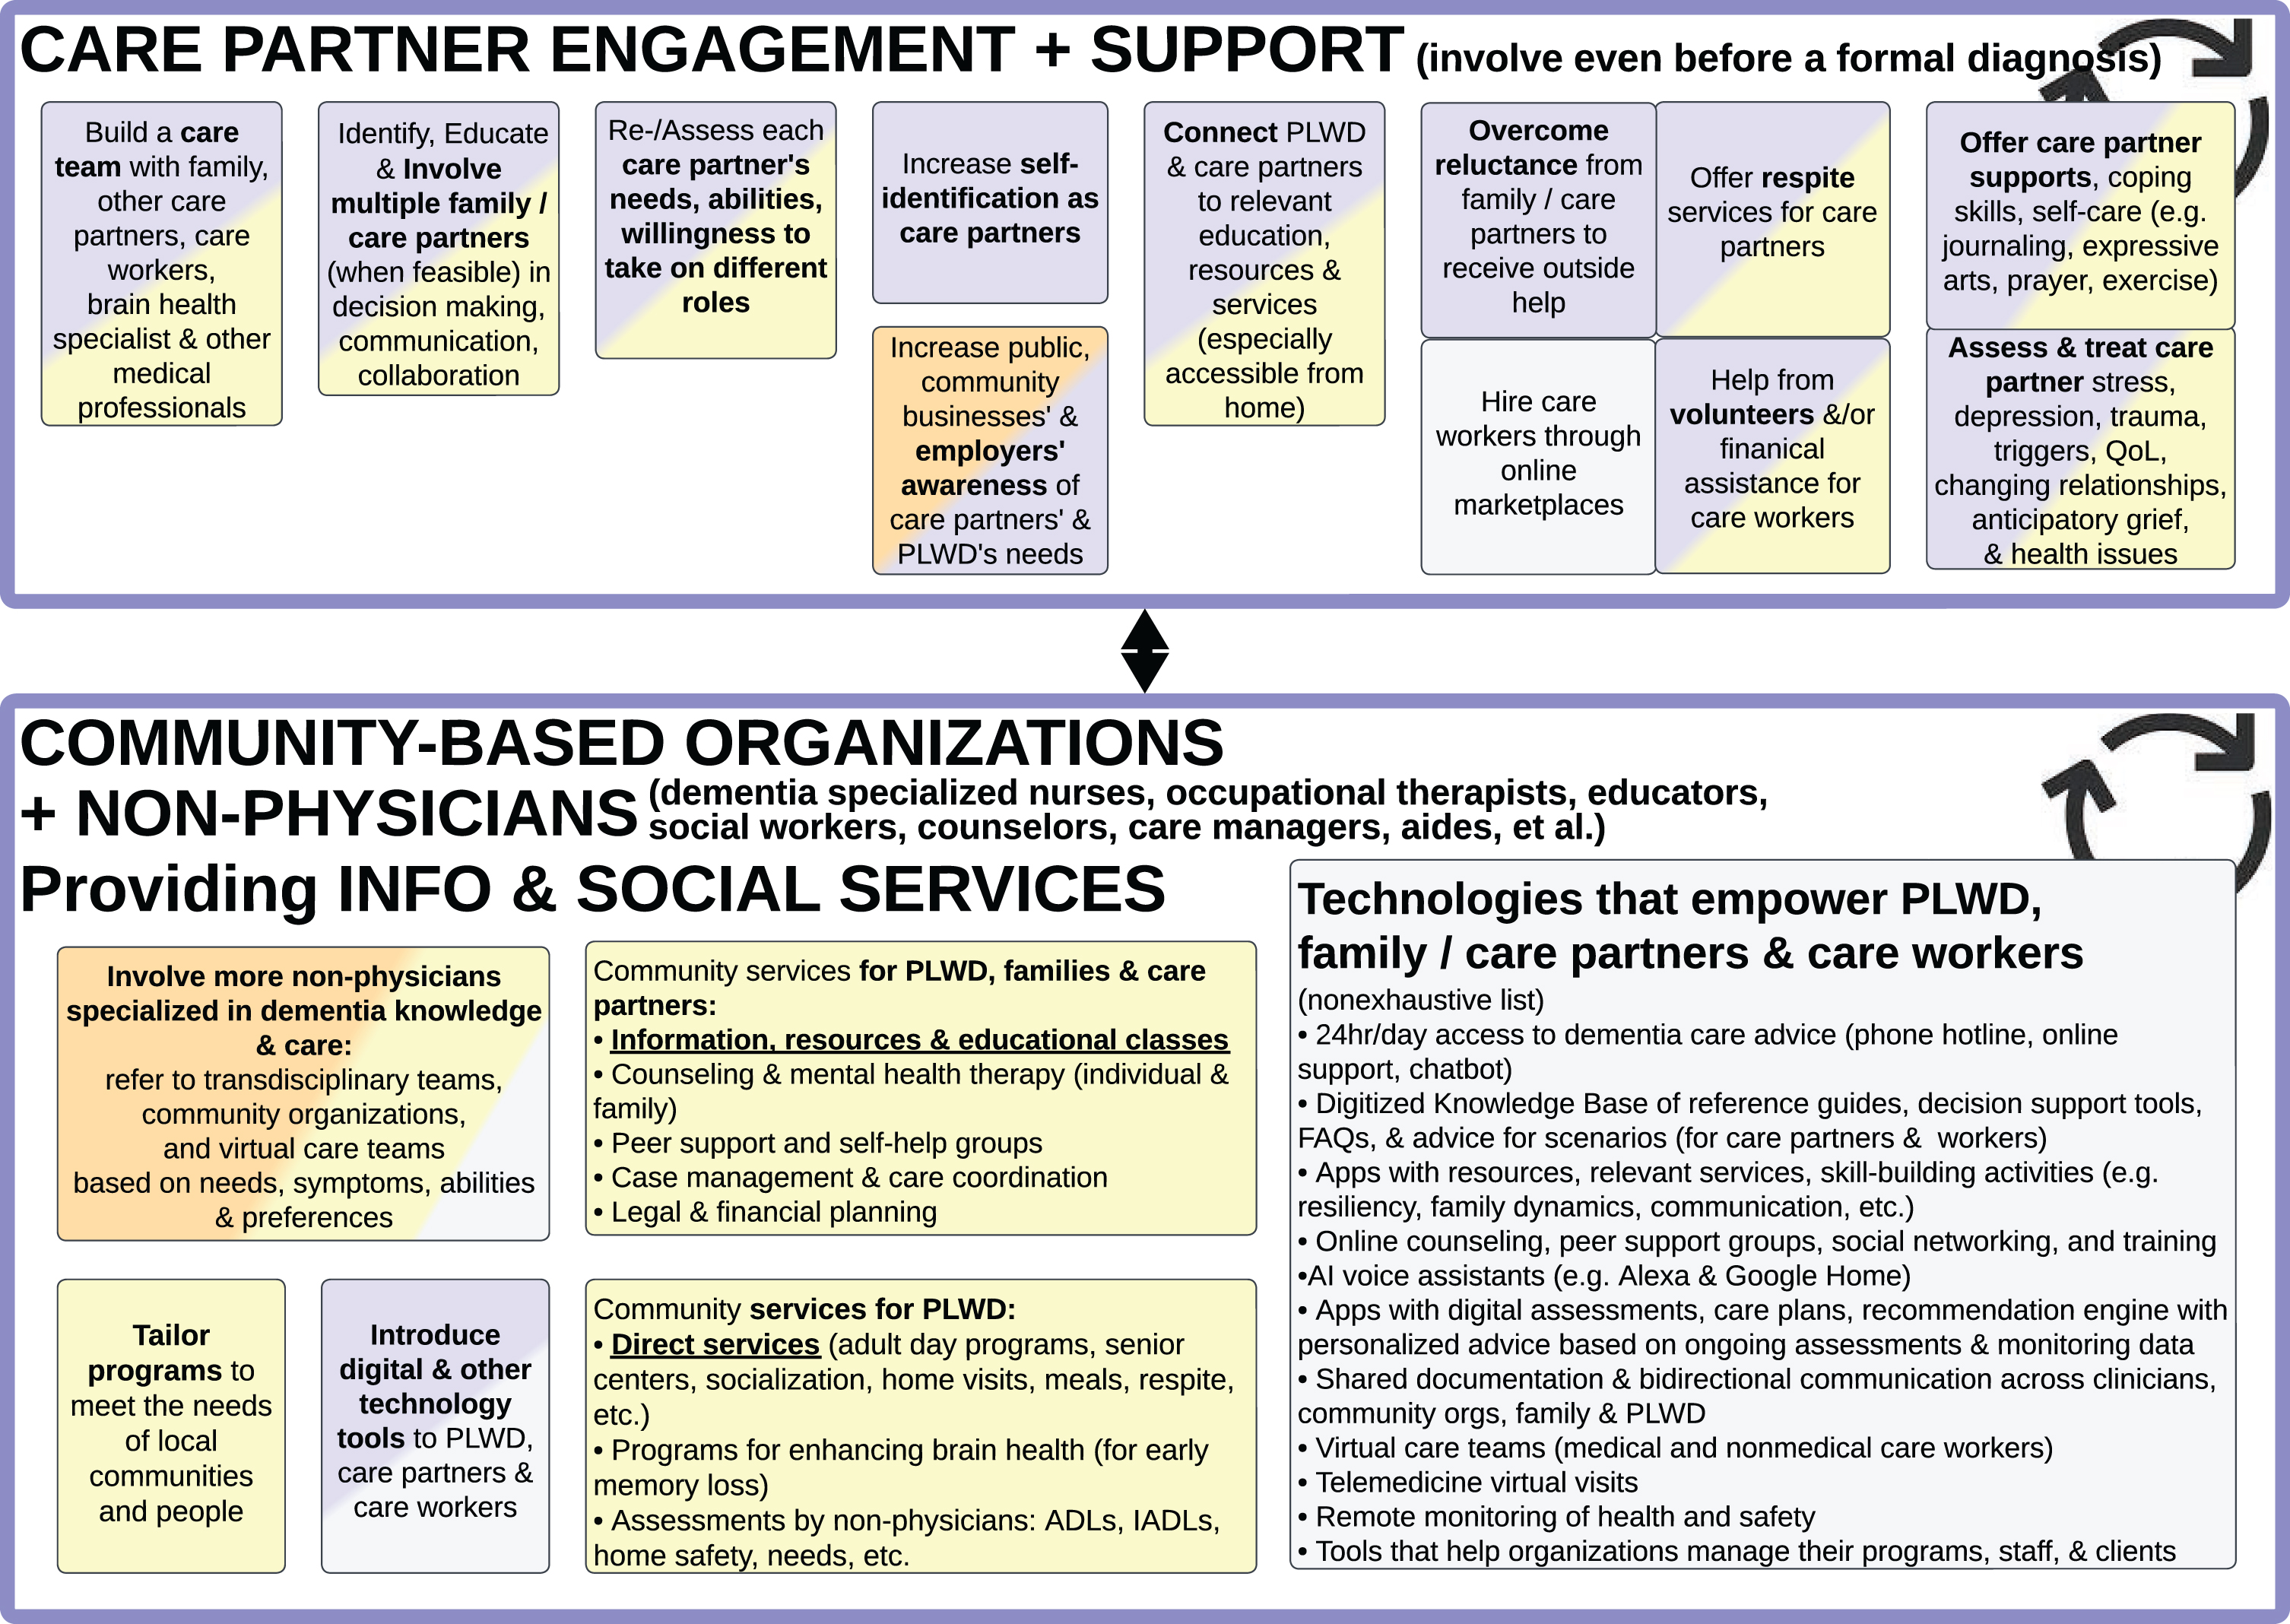 Care Partner Engagement and Support (top) and Community-Based Organizations Providing Information and Social Services (bottom).